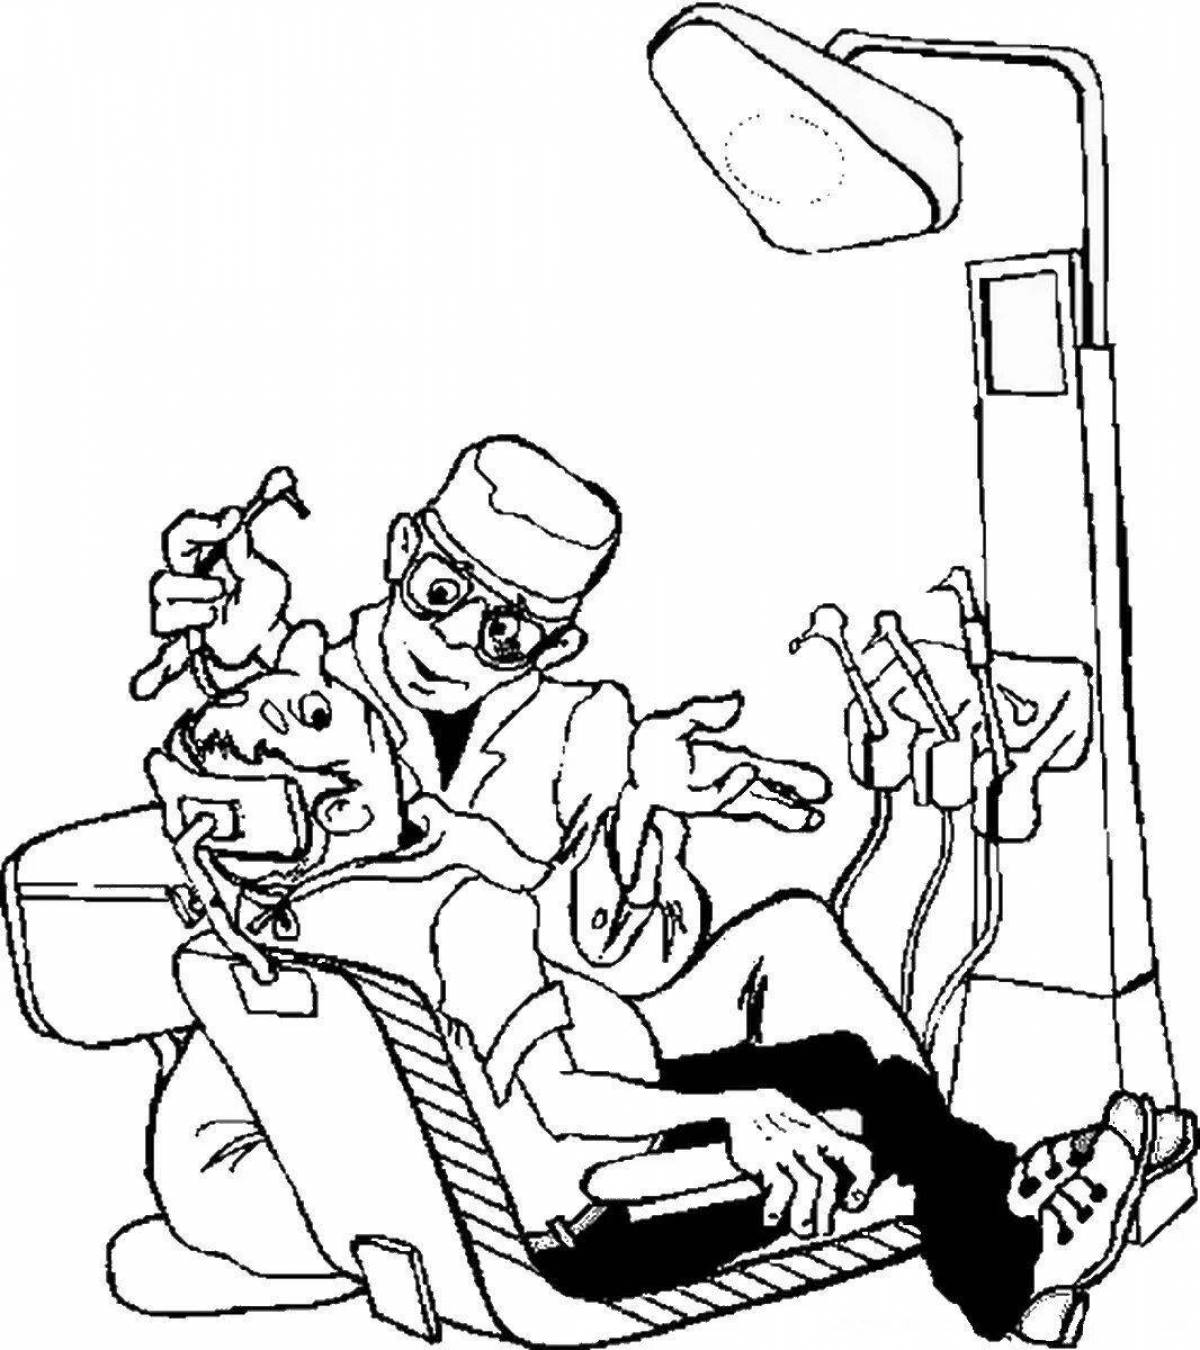 Radiation surgery coloring page